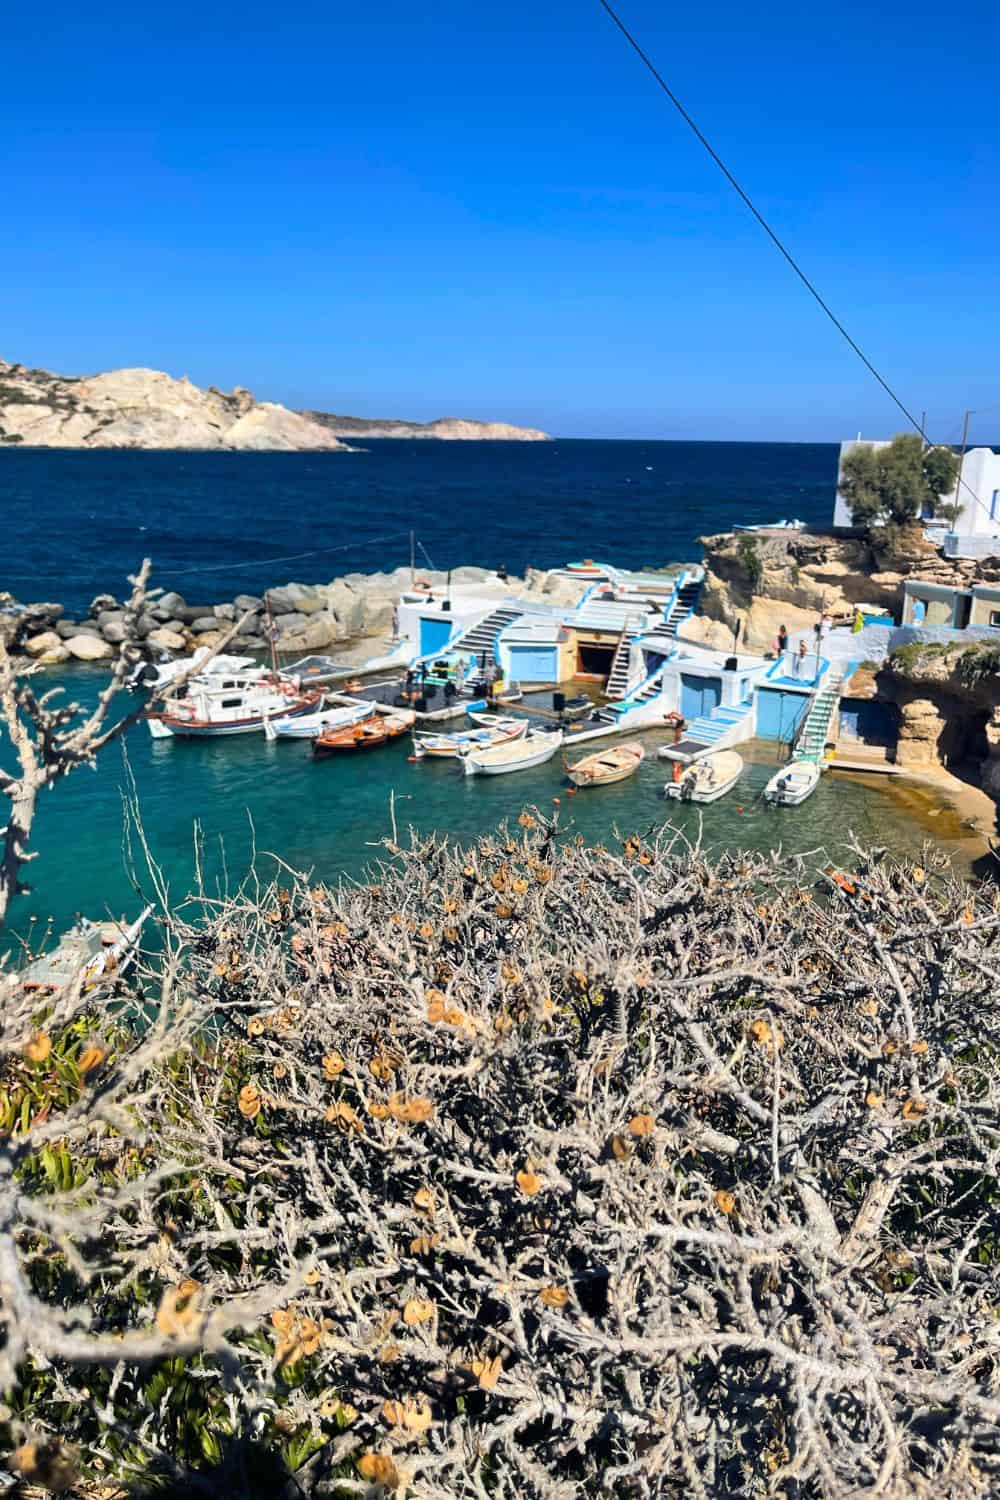 The small fishing village in Milos, Greece. Colorful boats in the water.